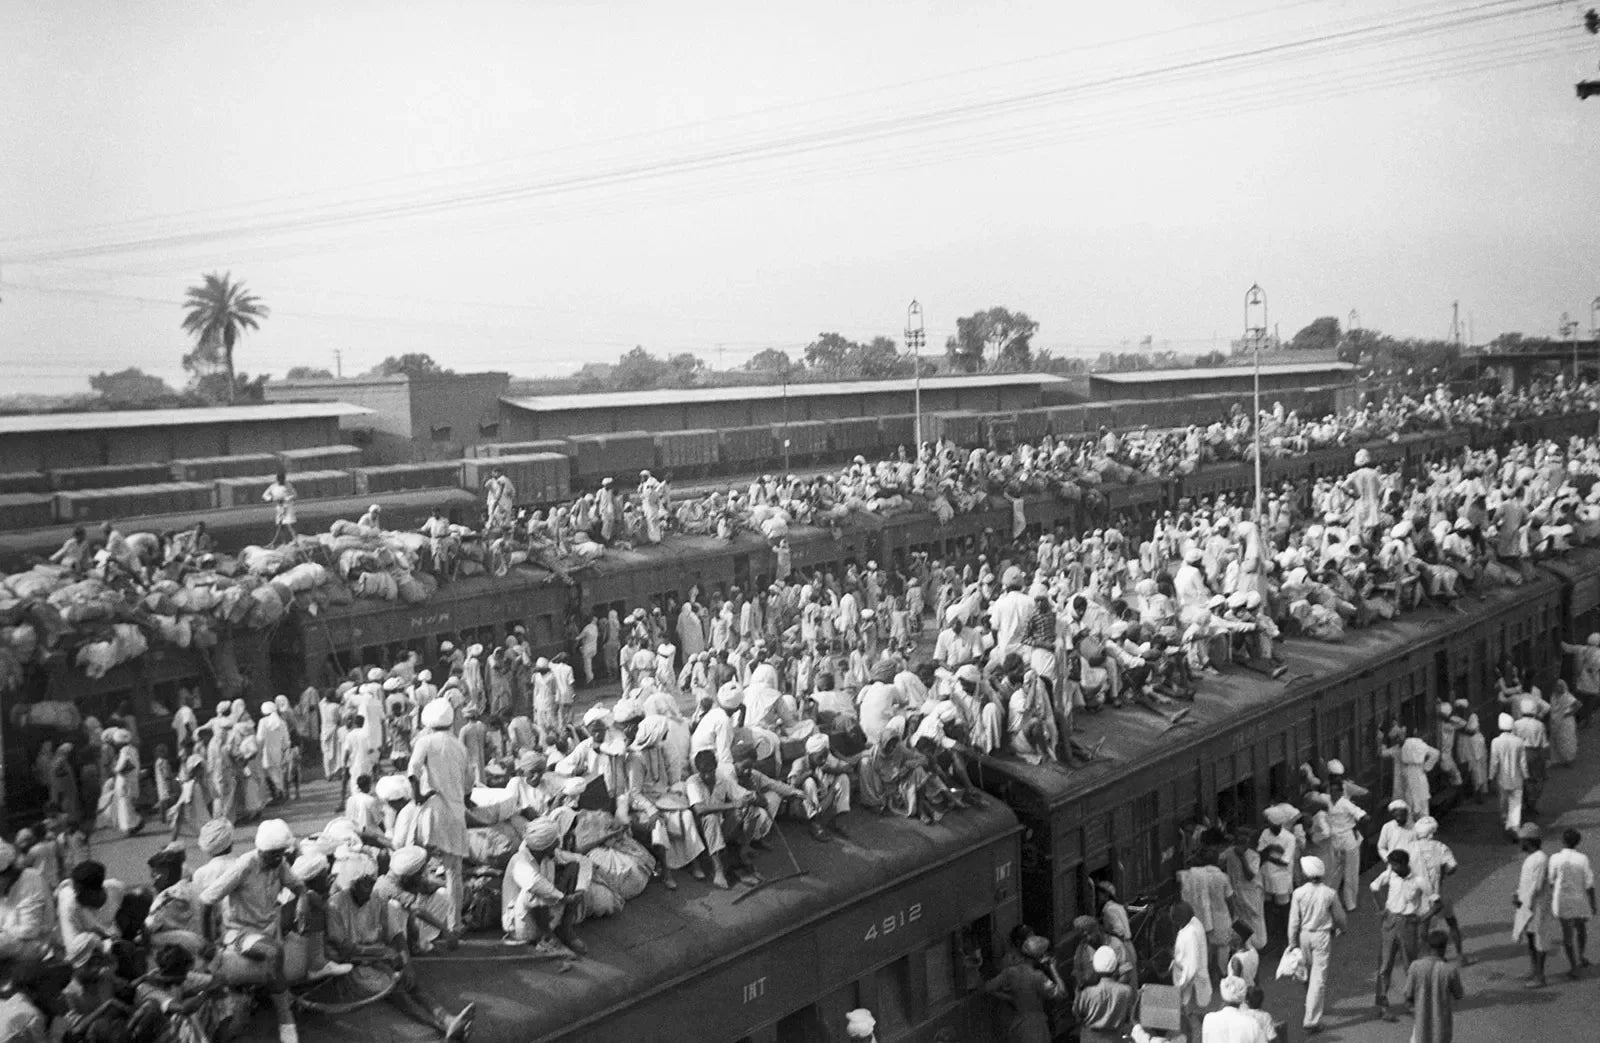 People Displaced during the partition of British India